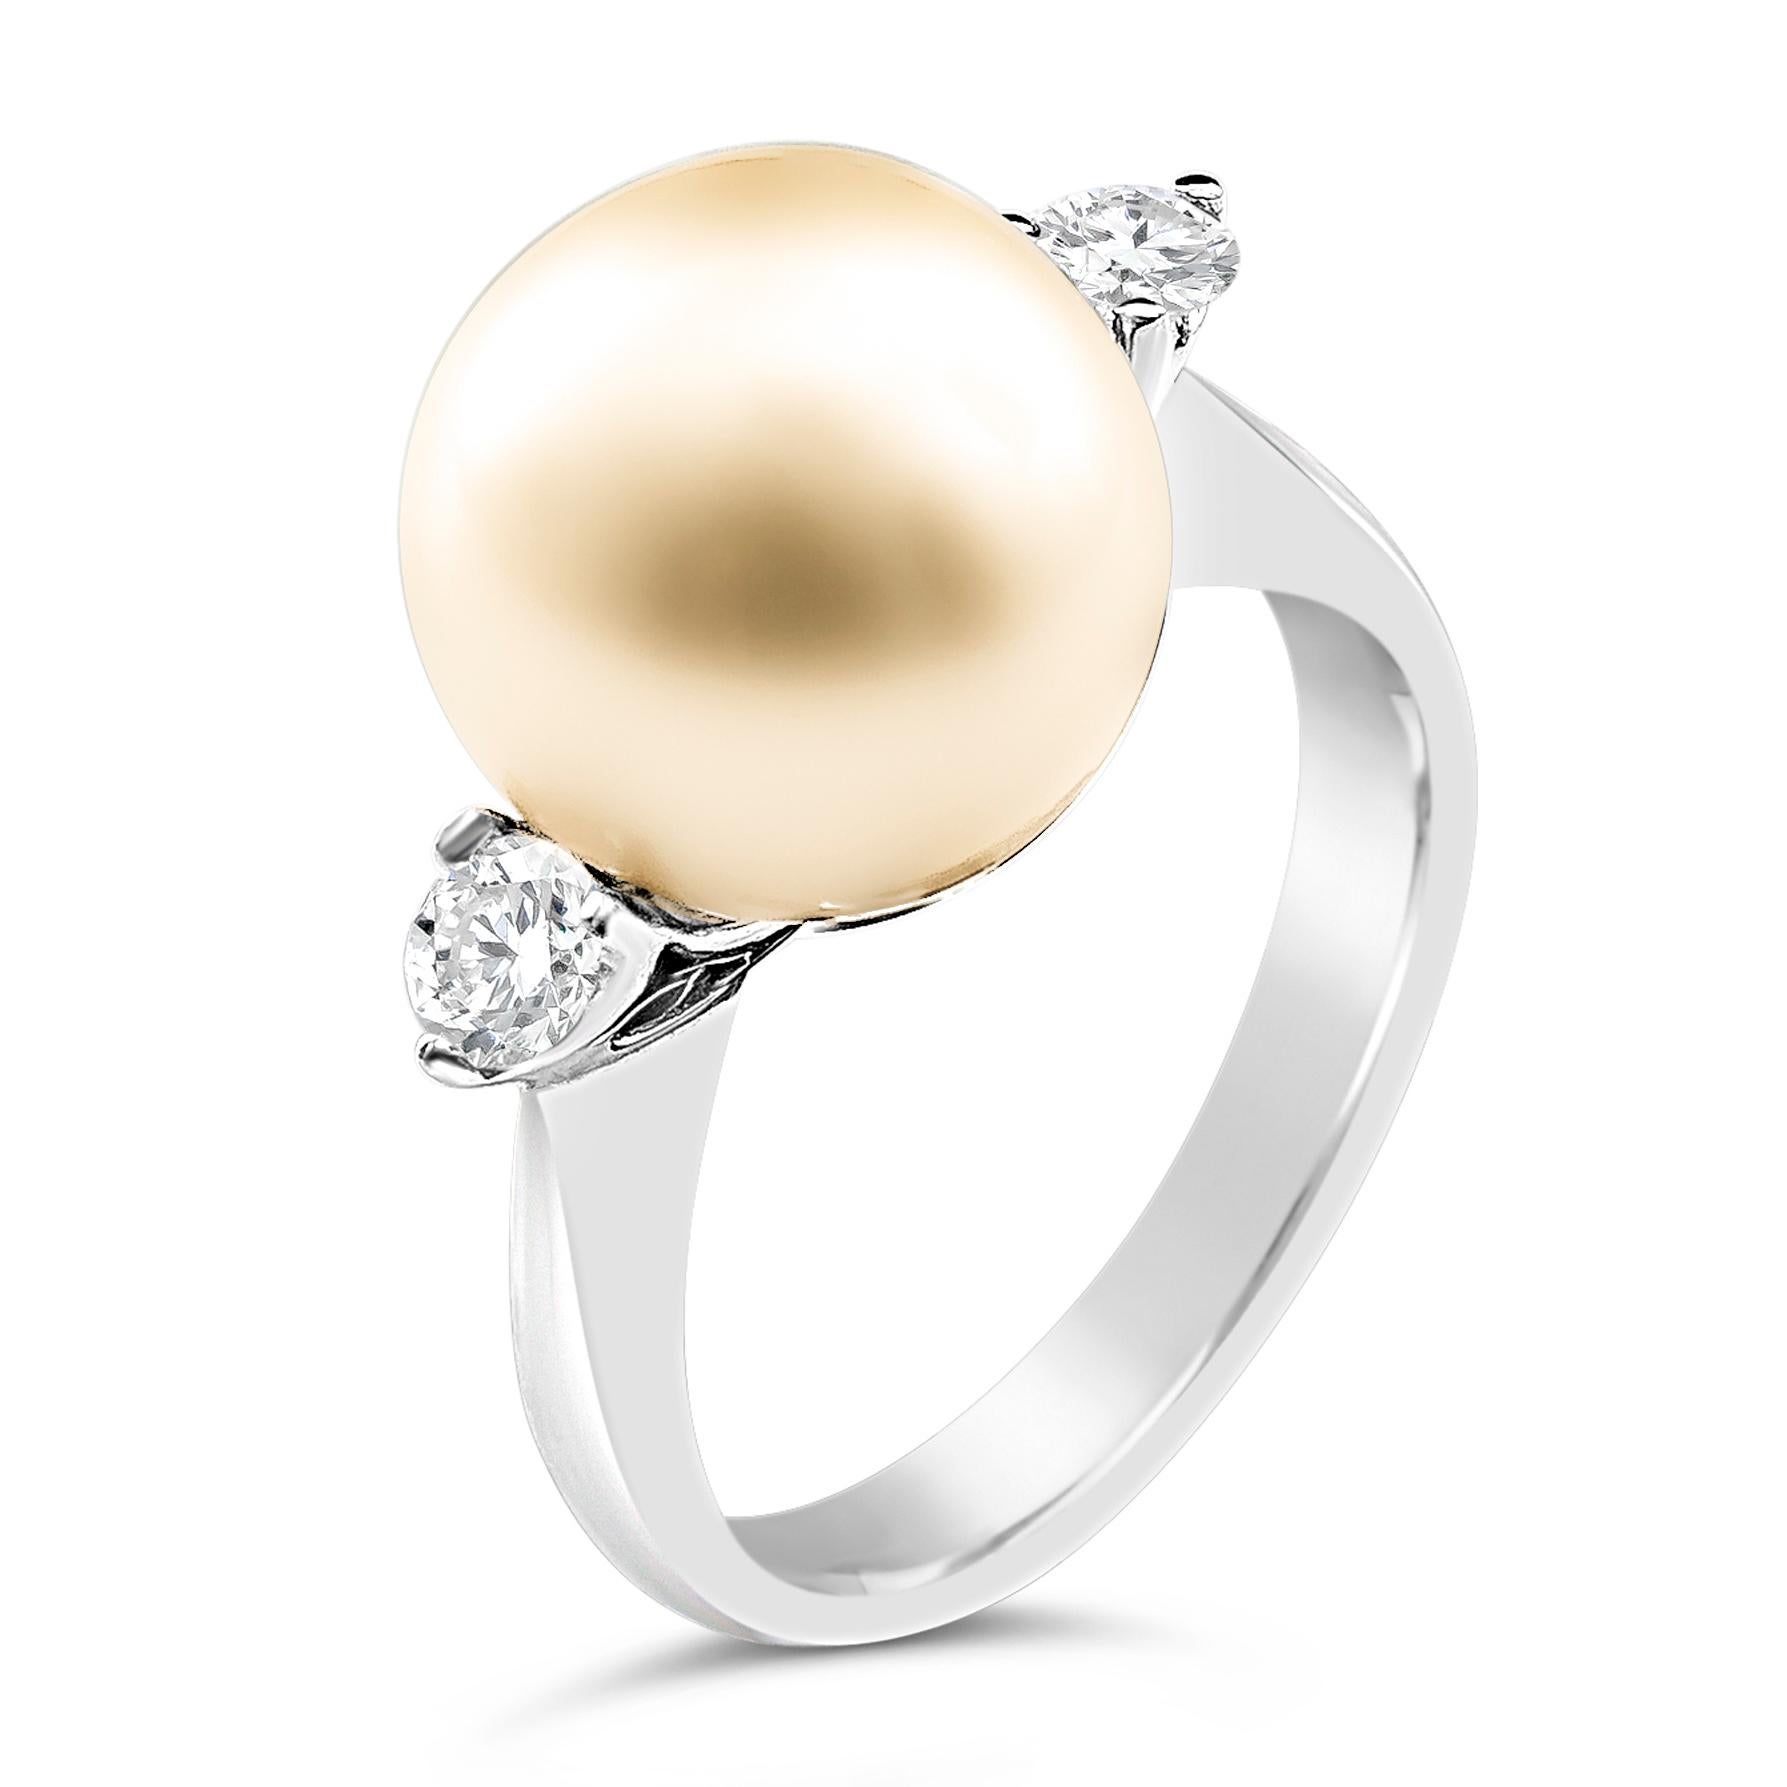 Showcases a single 12.00 millimeter golden south sea pearl flanked by 2 round brilliant diamonds weighing 0.32 carats total. Set and made in 18K White Gold. 

Roman Malakov is a custom house, specializing in creating anything you can imagine. If you